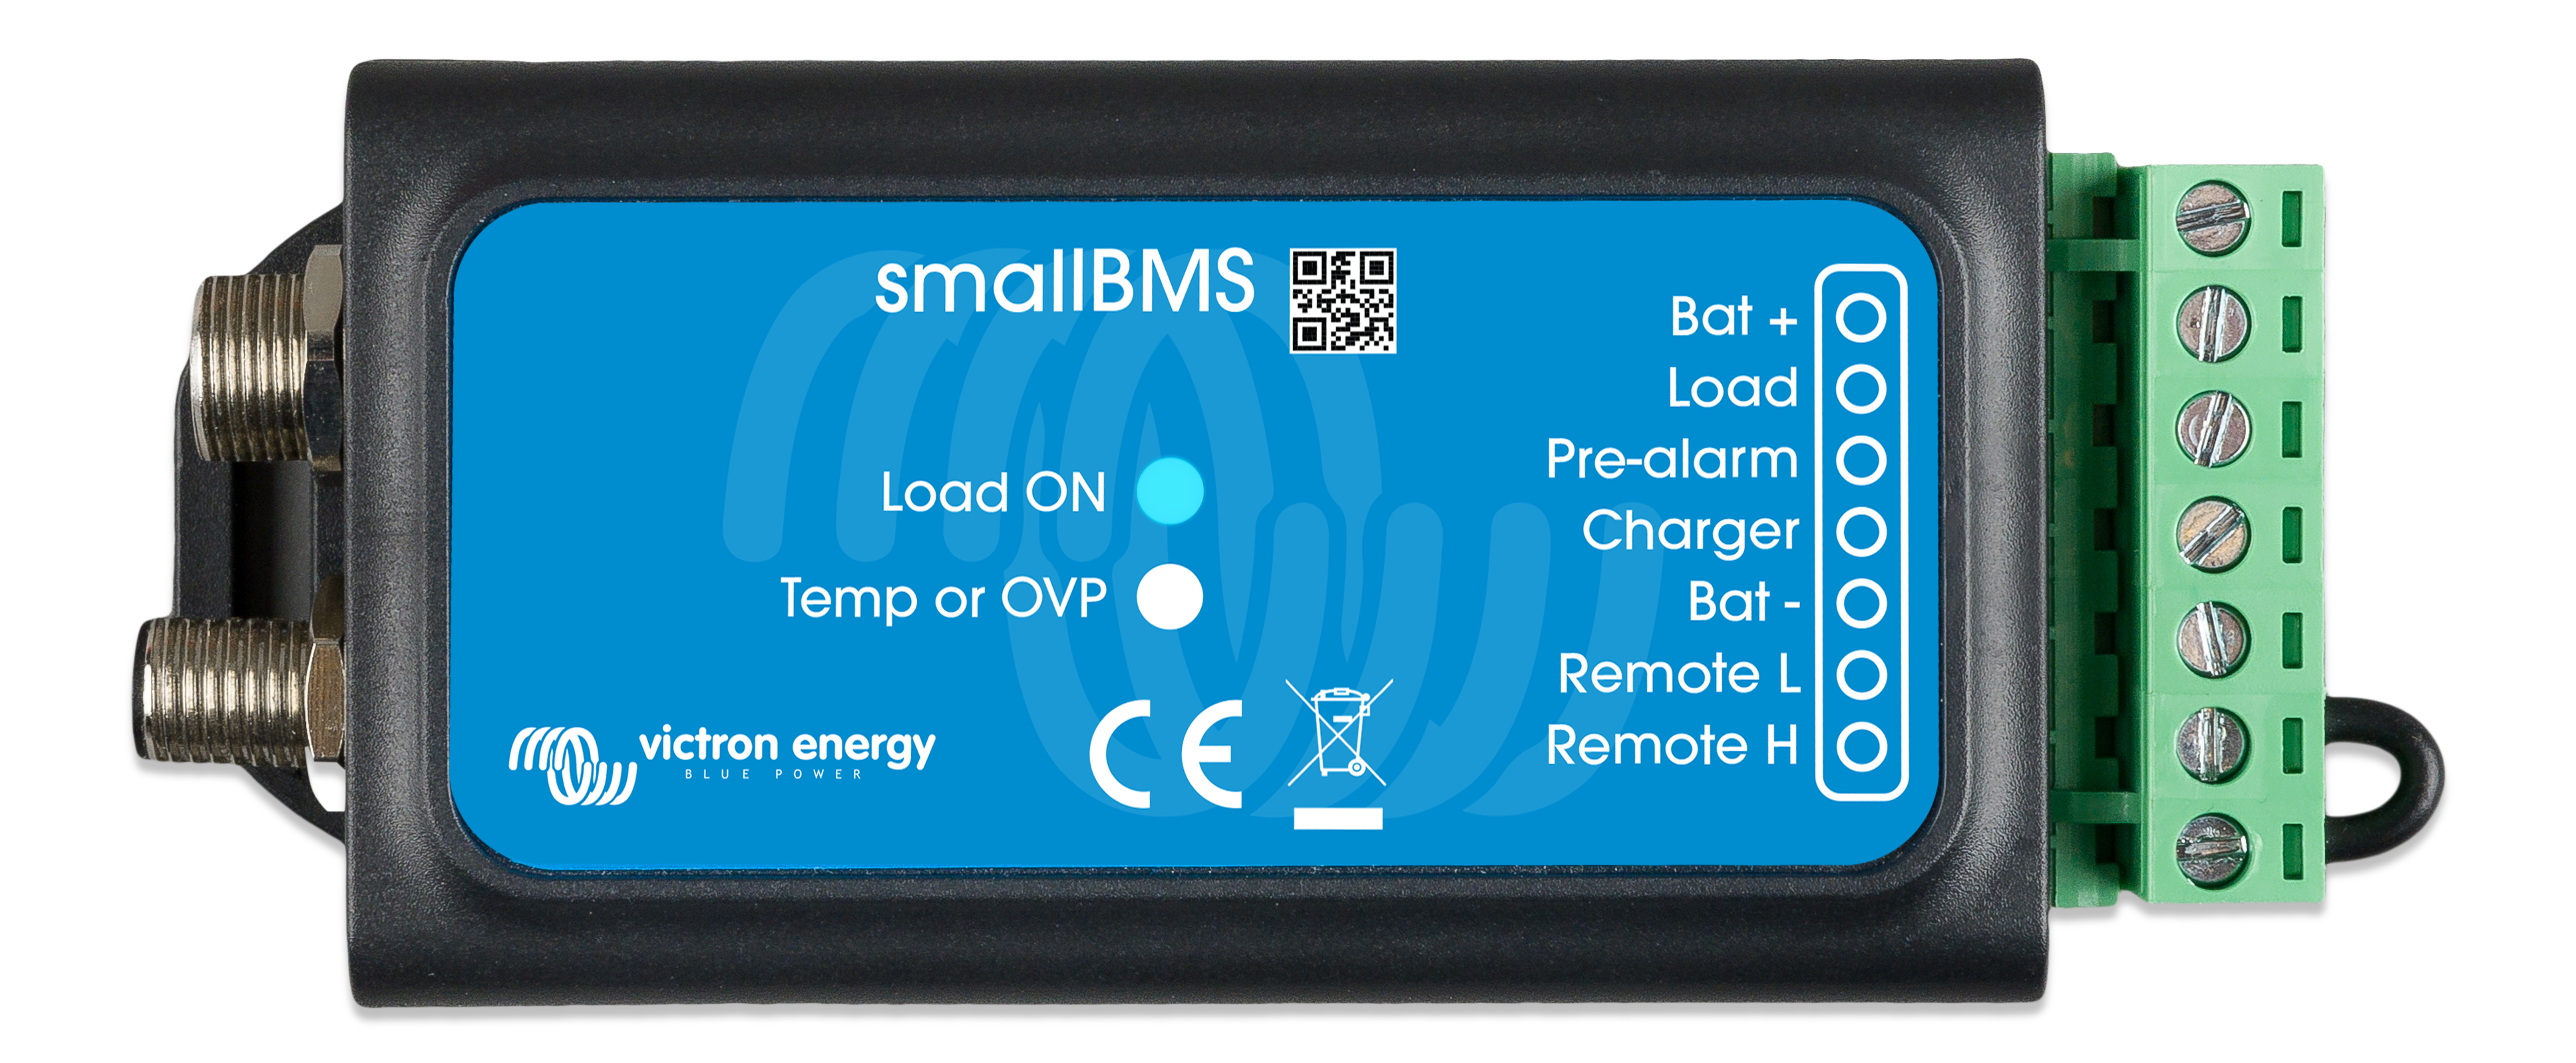 smallBMS with pre-alarm - Victron Energy